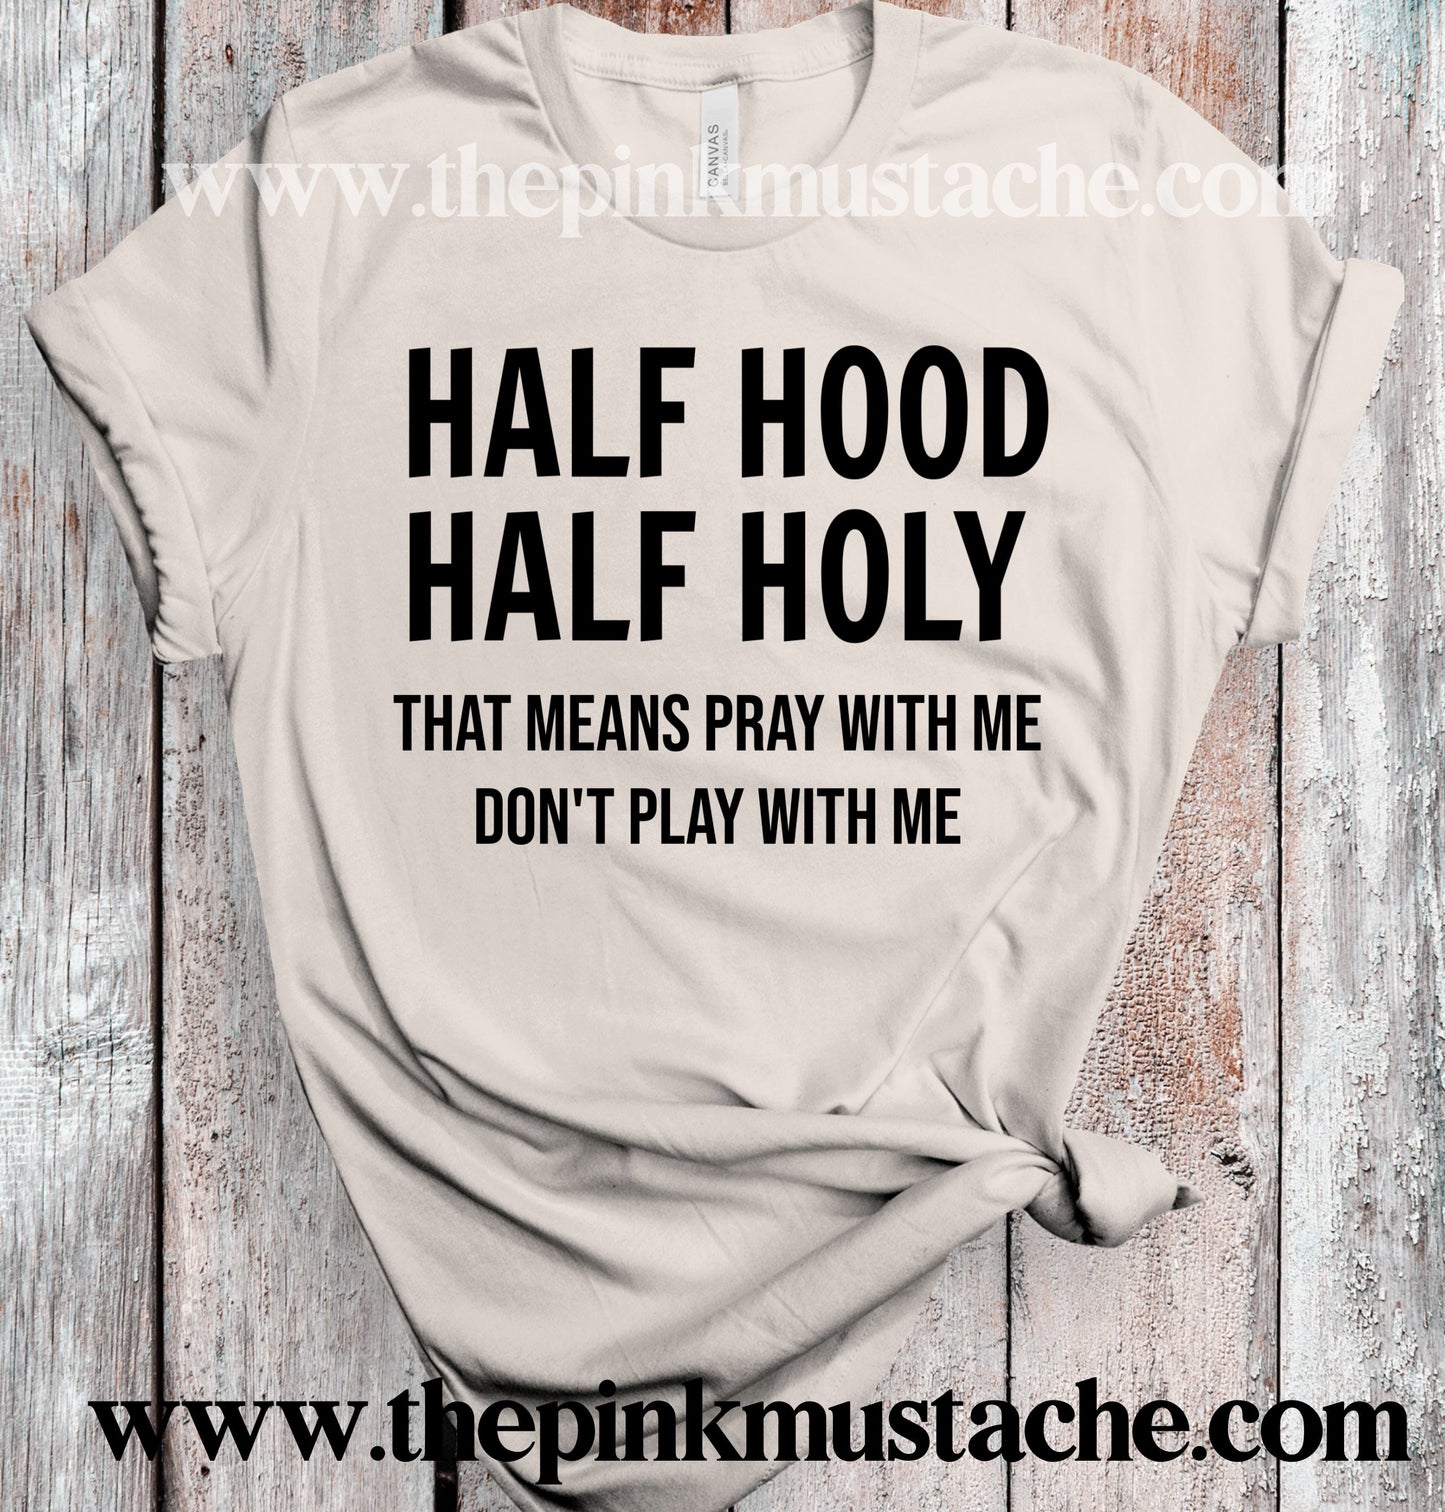 Half Hood Half Holy - That Means Pray With Me Don't Play With Me - Super Soft Tee / Bella Canvas Quality Shirt